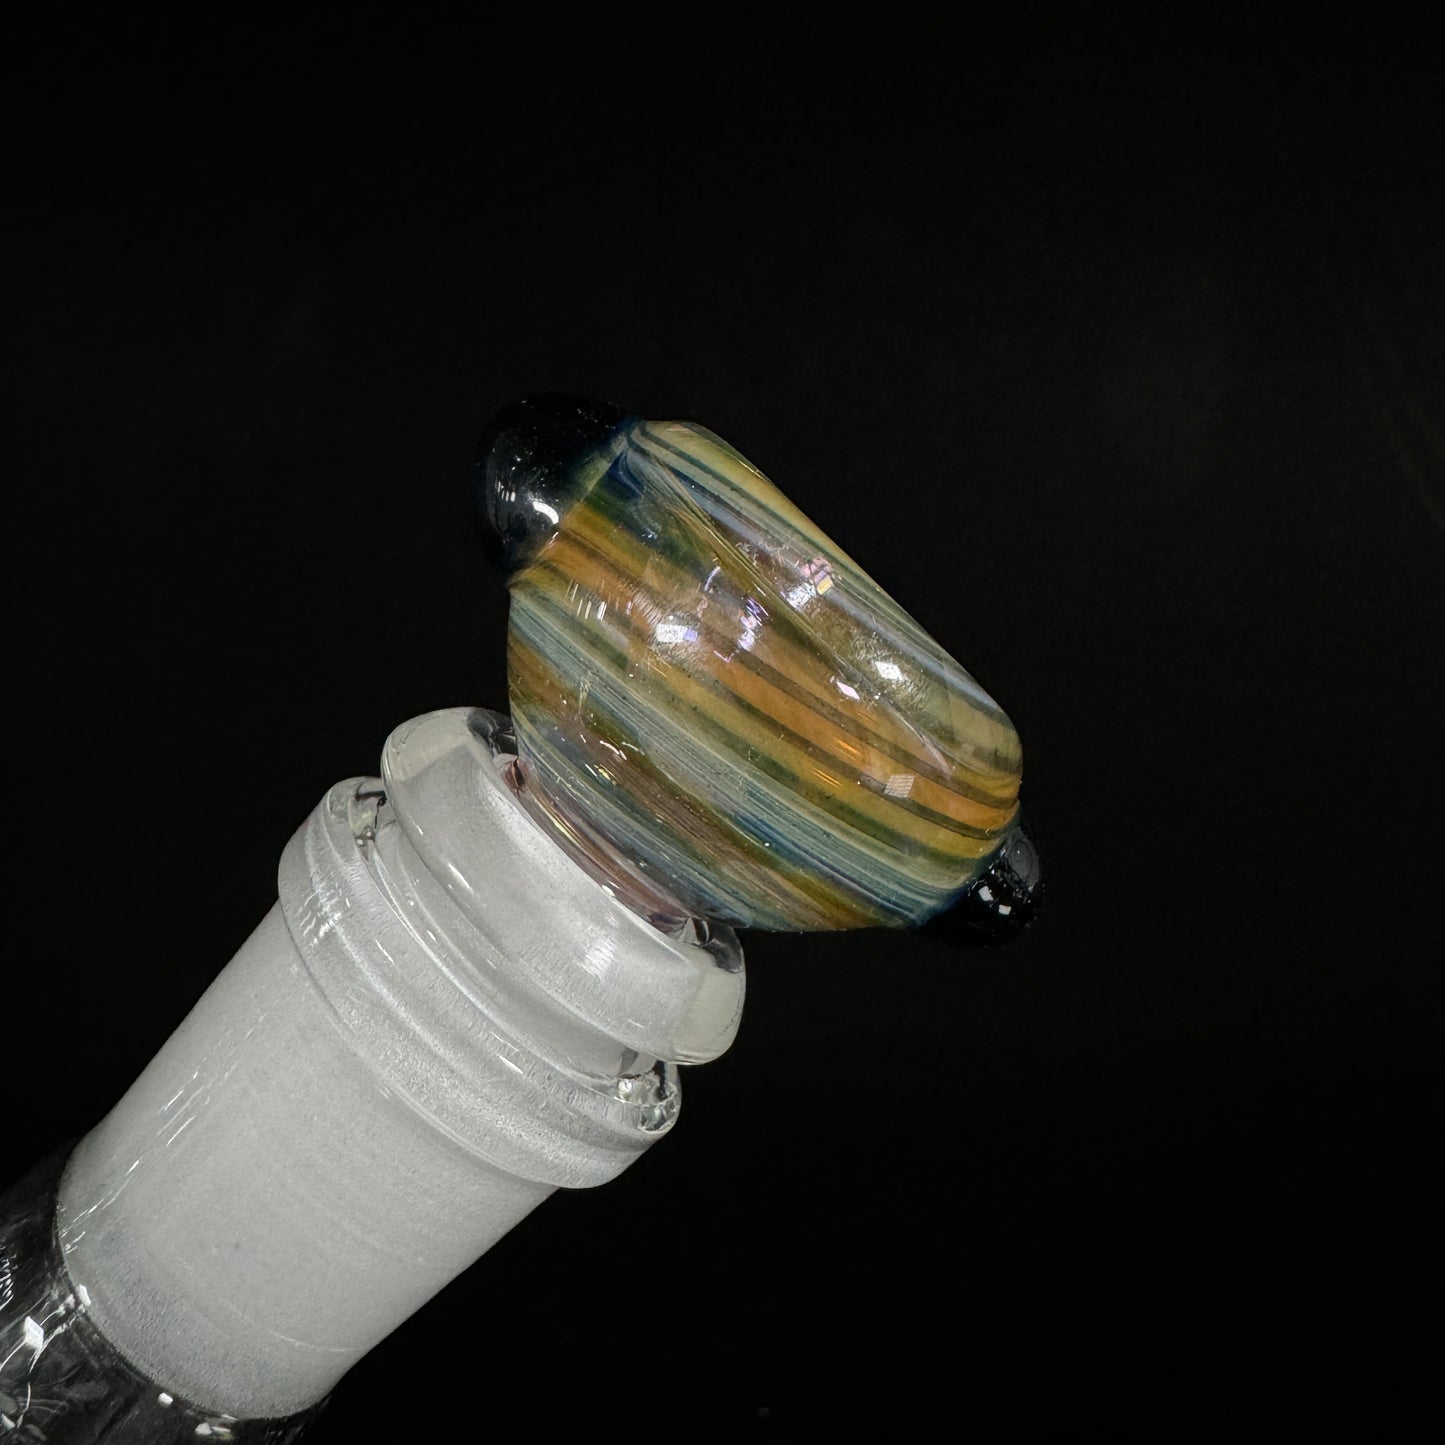 14mm Twisty Fumed (Color Changing) Bowls